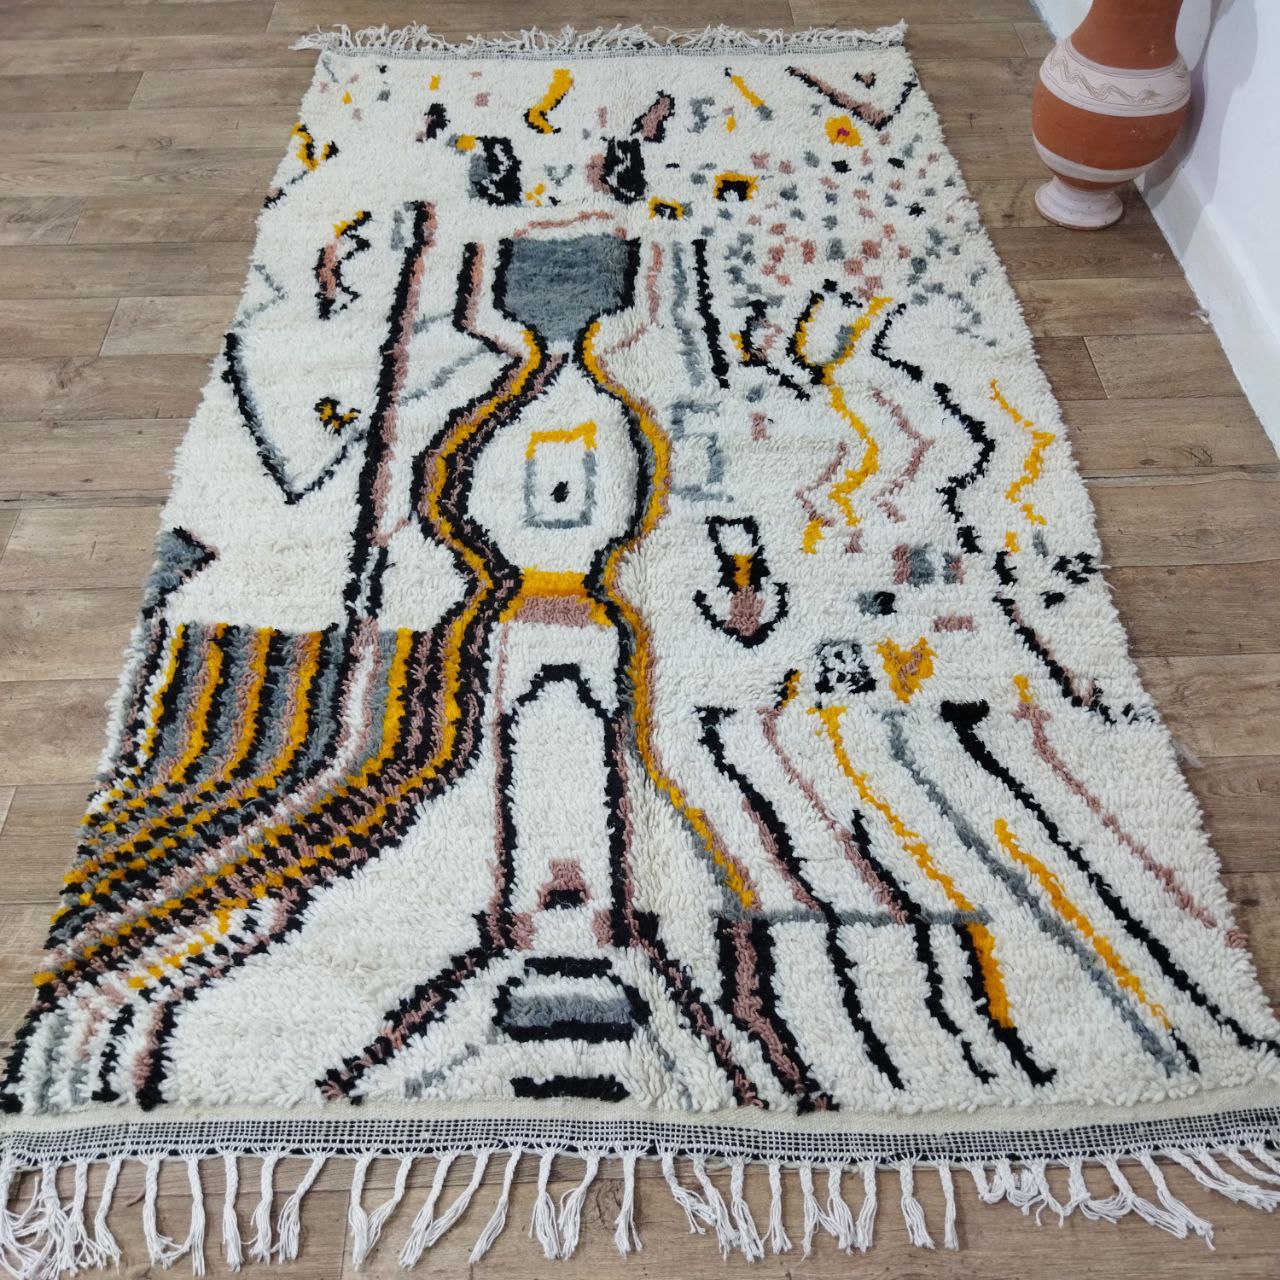 Timeless Beauty: Moroccan Style Azilal Berber Rugs